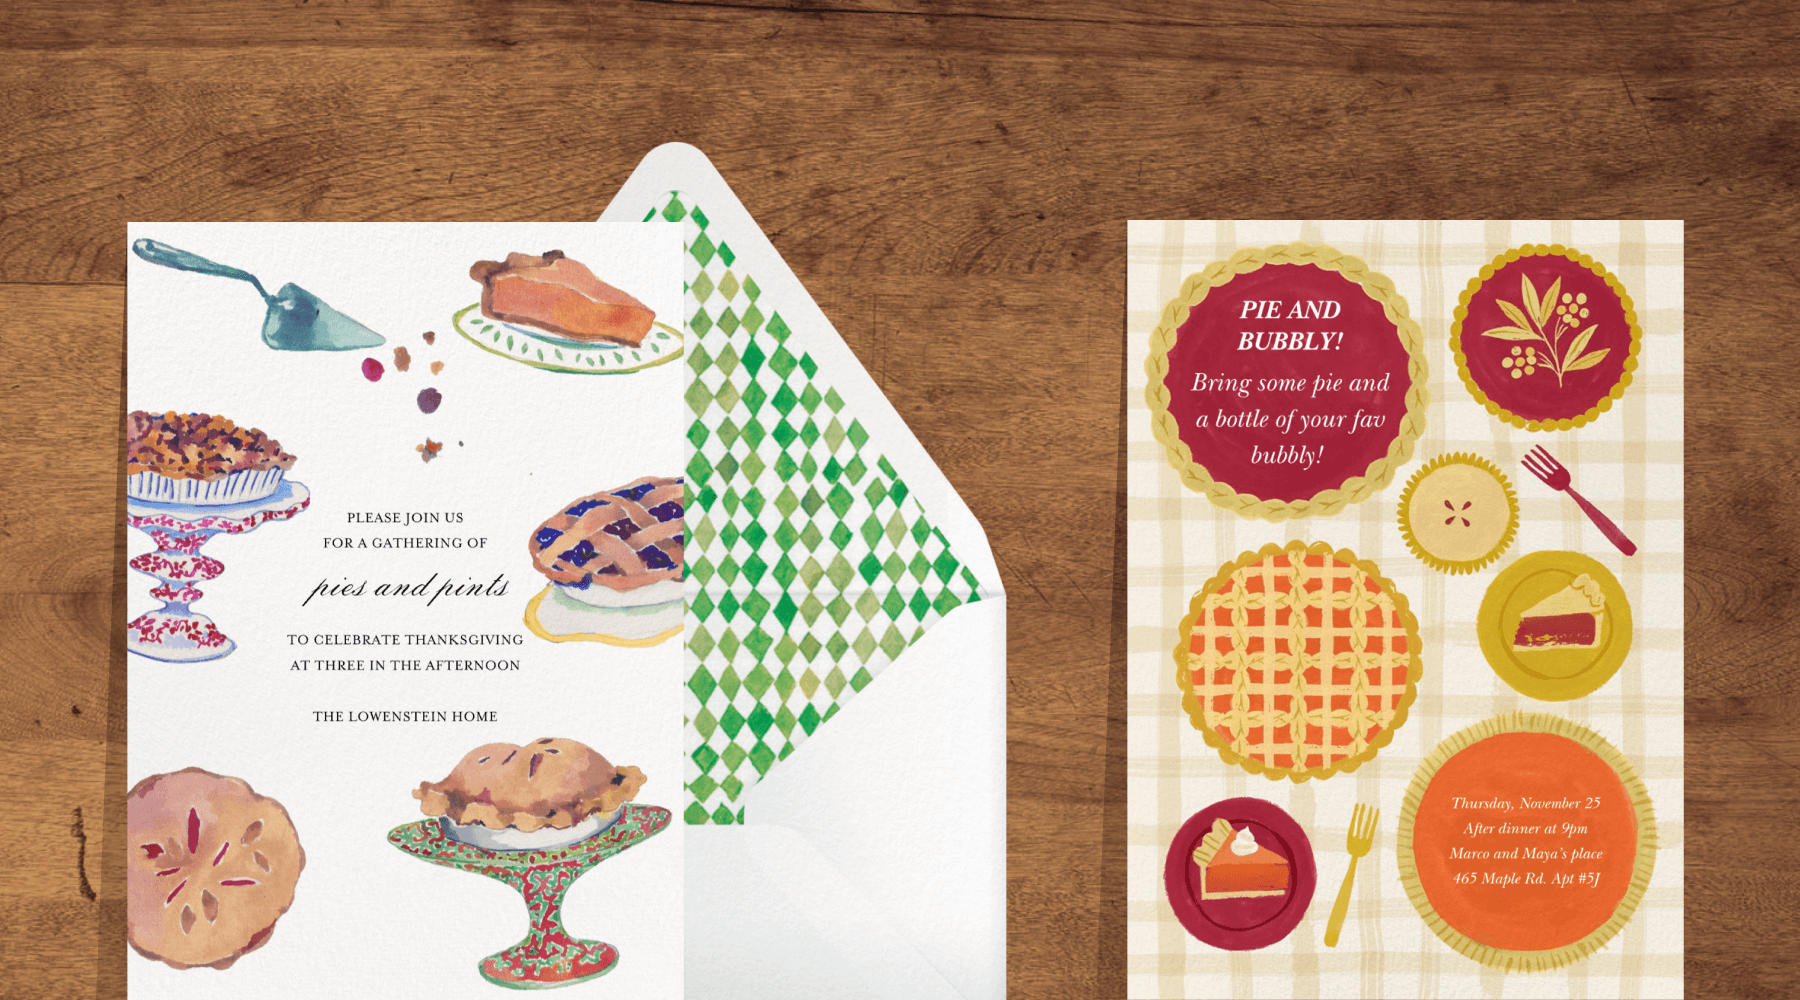 Left: An invitation with watercolor paintings of pies on cake stands and dishes. Right: An invitation with simplistic red, orange, and yellow pies and slices viewed from above on a faded checker background.